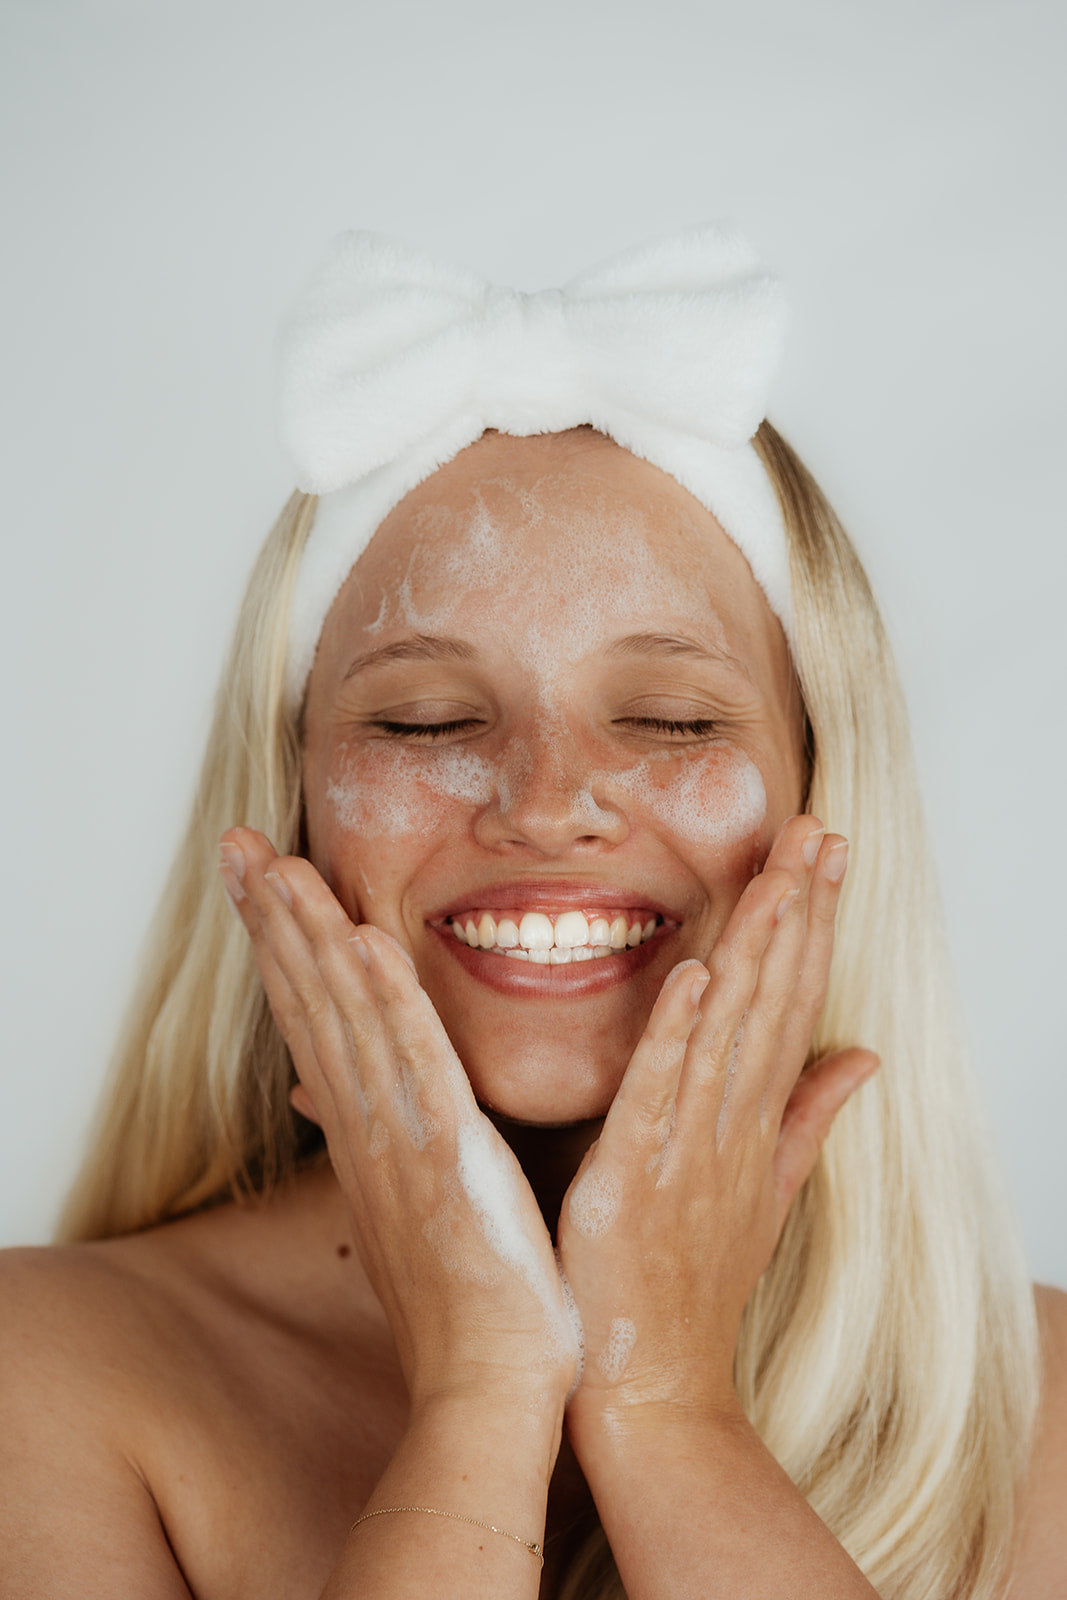 Kindred Skincare headband for your skincare routine all skin types australia - woman girl blonde with no acne pimples washing her face with gel cleanser smiling and happy as she has good skin